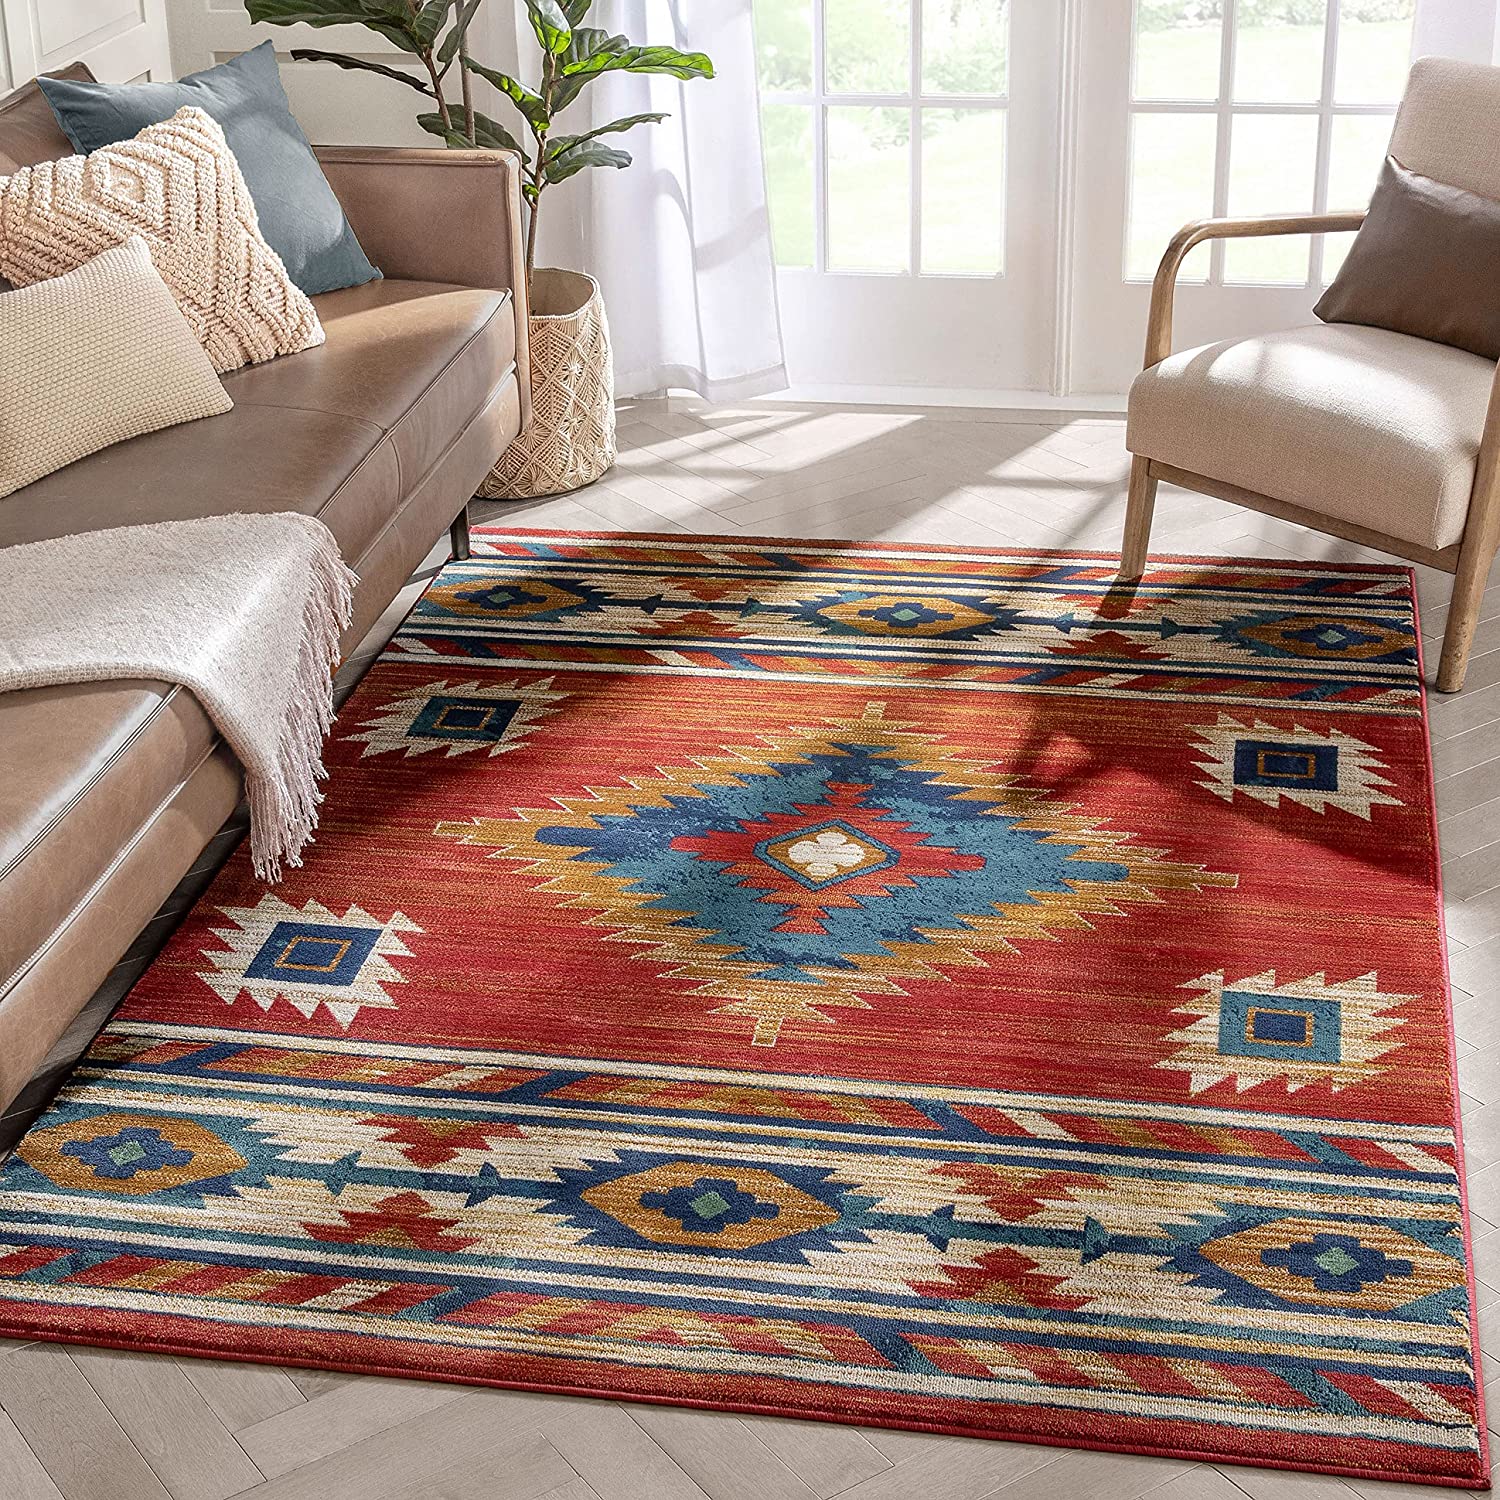 Well Woven Lizette Red Traditional Medallion Area Rug